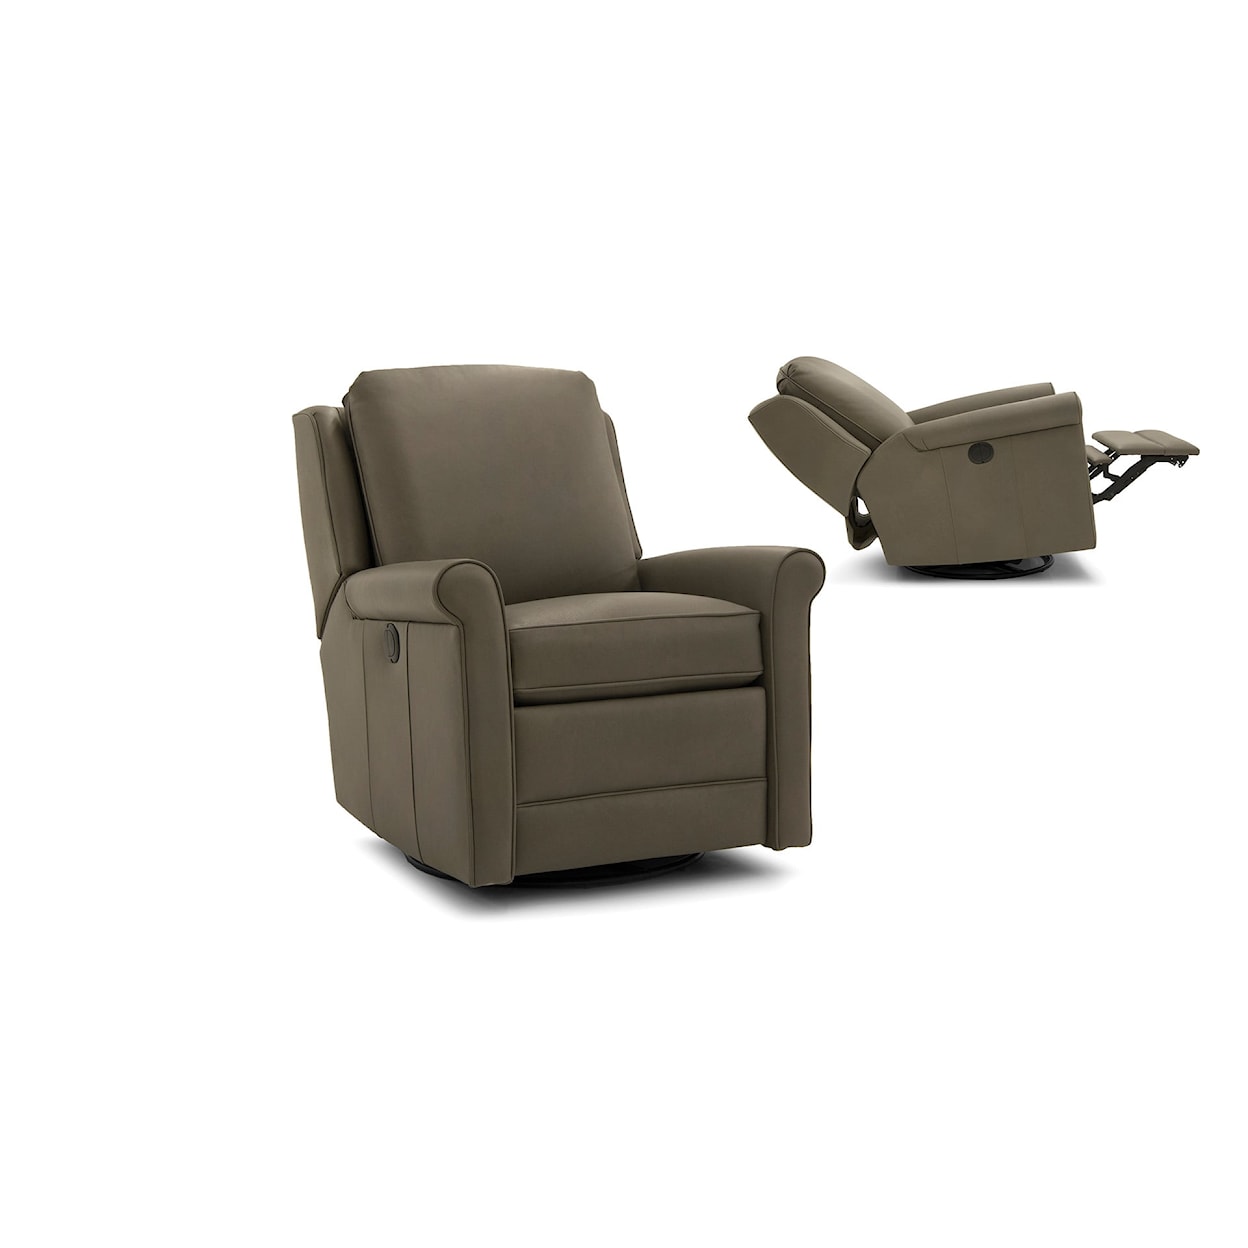 Smith Brothers 733 Power Swivel Glider Recliner